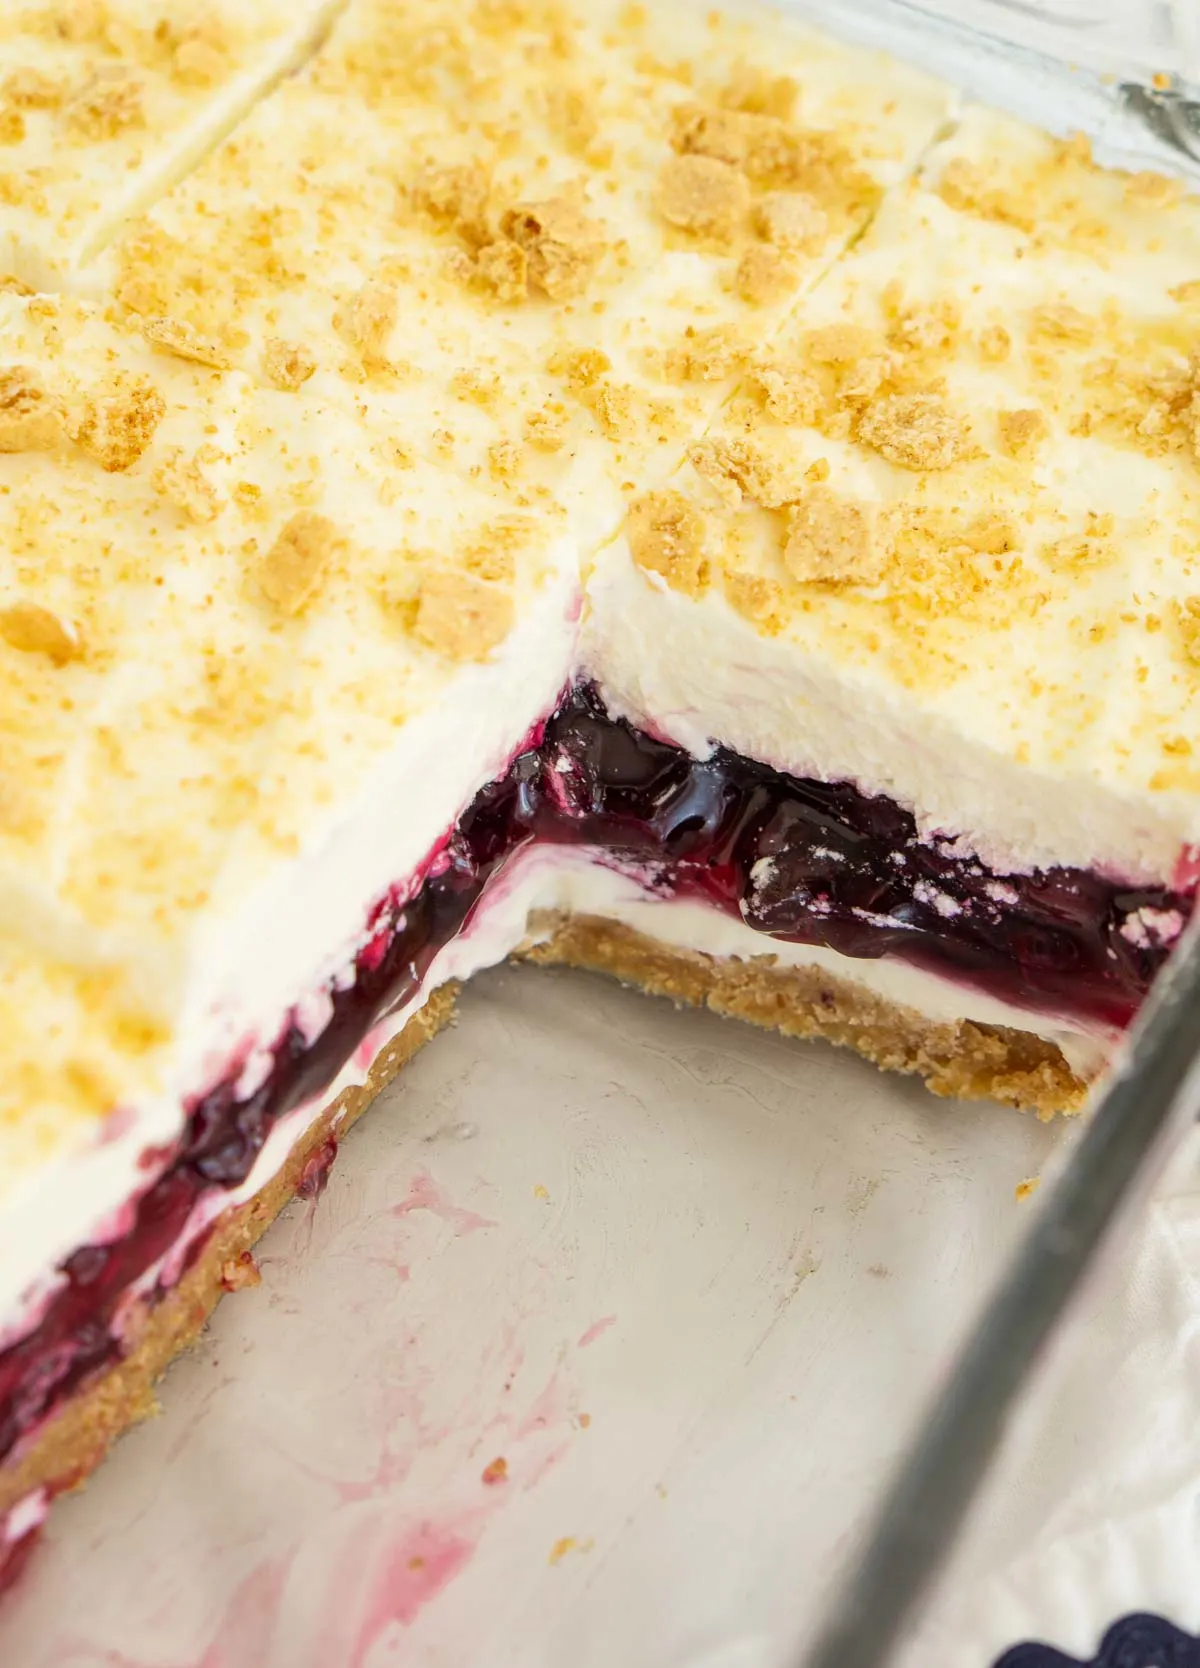 Baking pan with layered no-bake blueberry delight dessert.